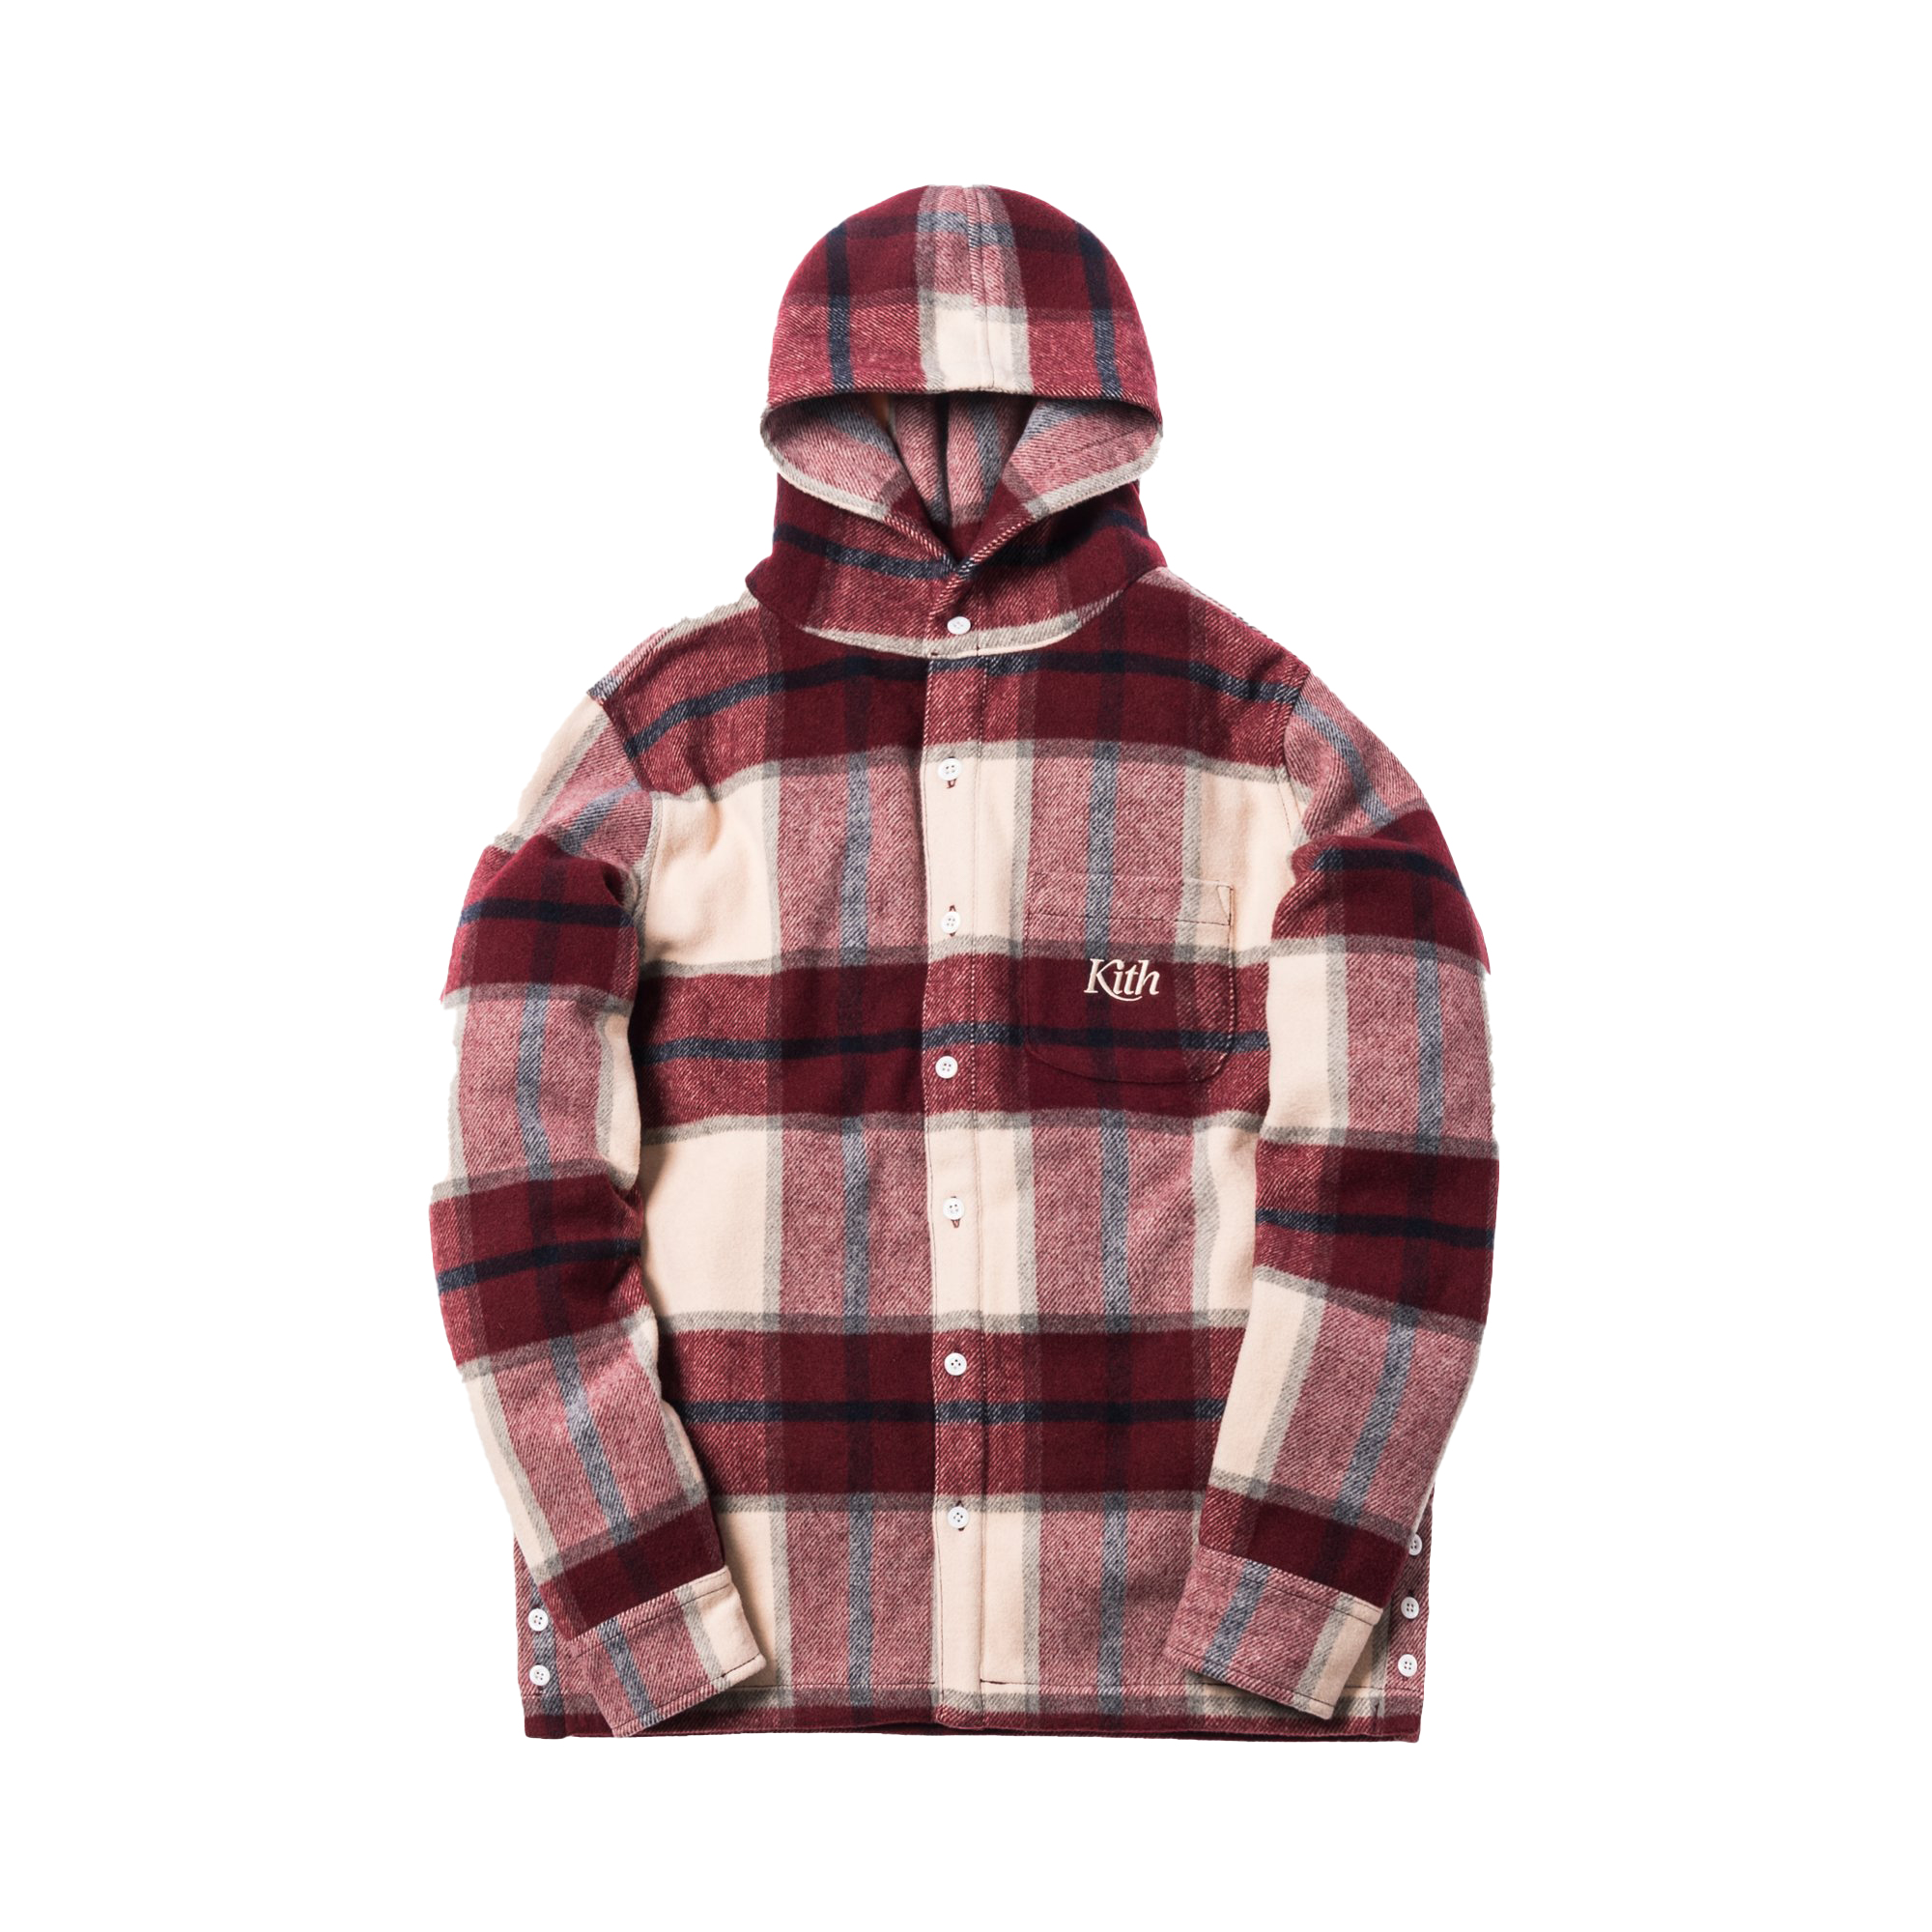 KITH ボアジャケット Hooded GINZA 21FW-